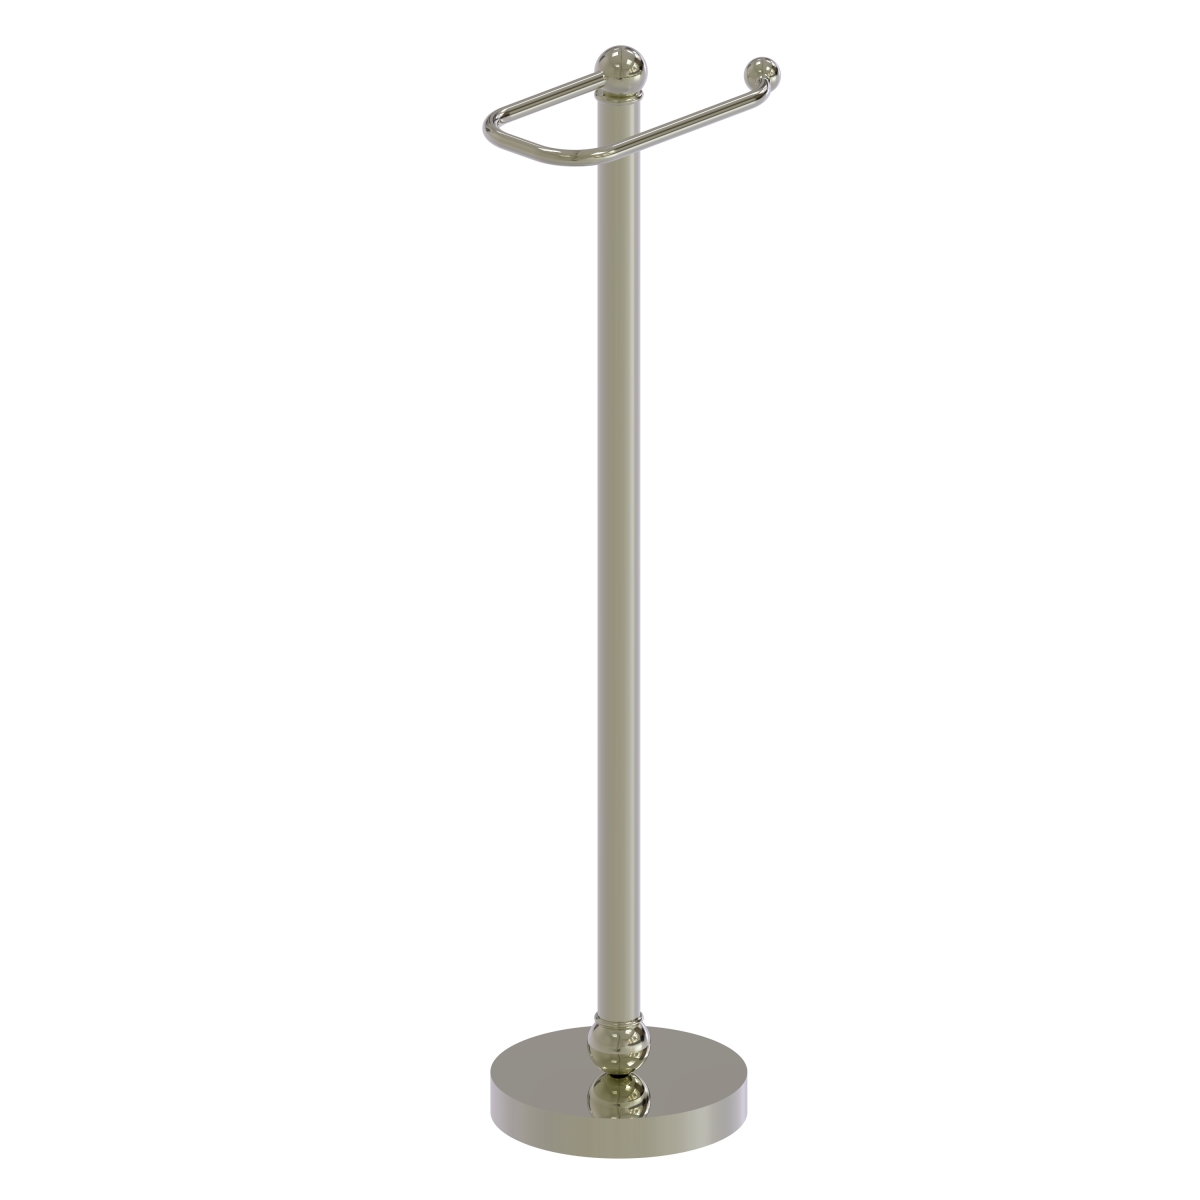 Allied Brass GL-39-PNI Free Standing Toilet Tissue Holder, Polished Nickel - 6 x 26 x 7.8 in.